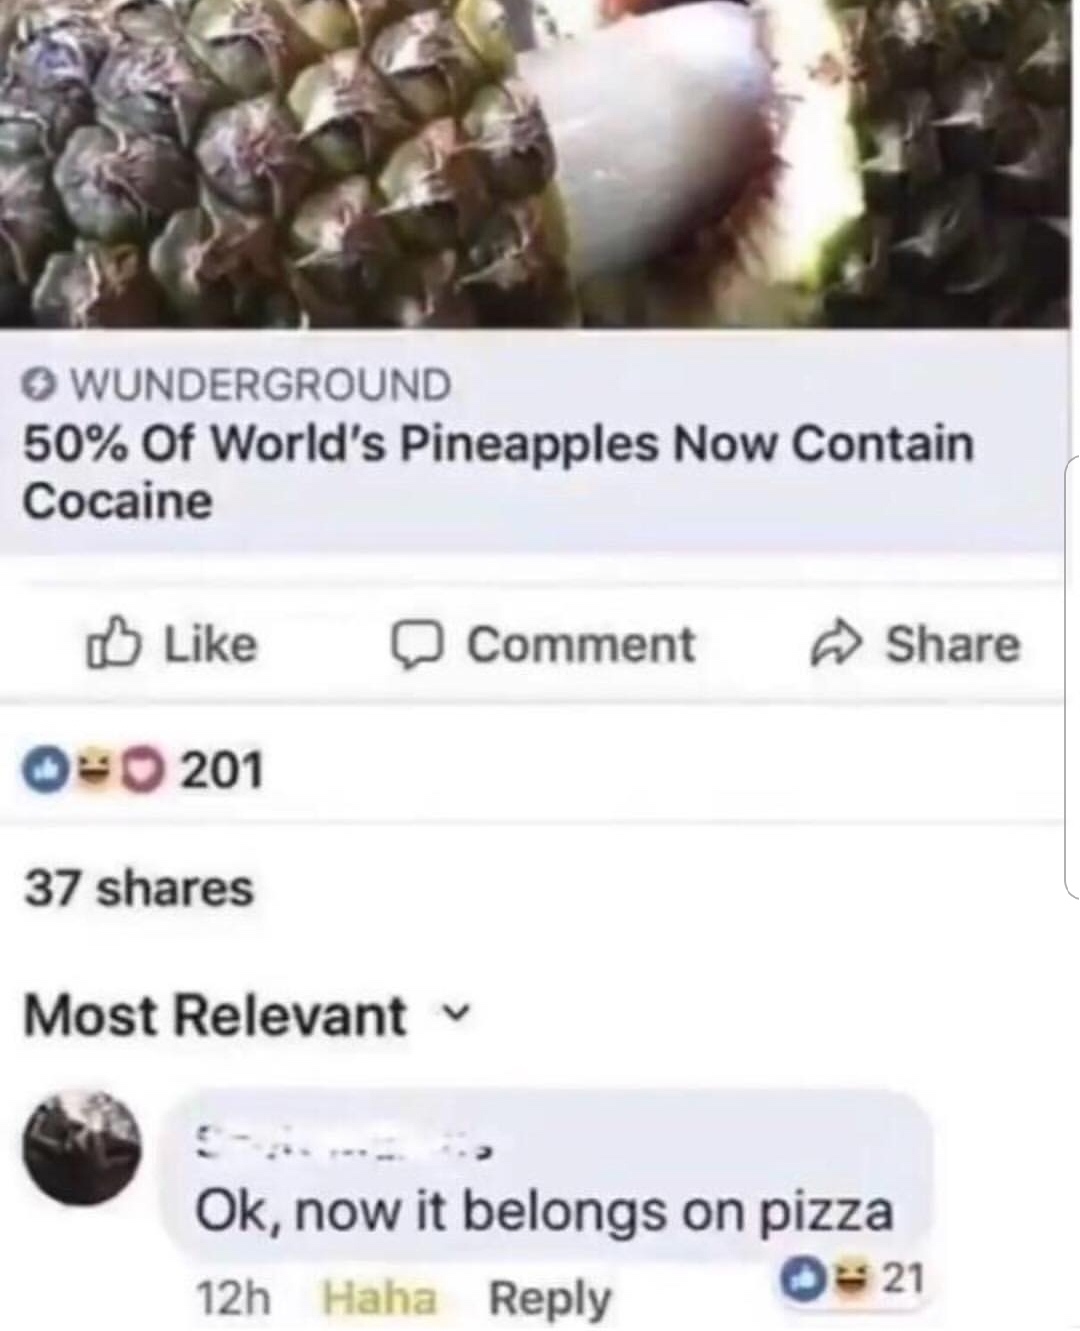 pineapple cocaine meme - Wunderground 50% Of World's Pineapples Now Contain Cocaine Comment 0 201 37 Most Relevant Ok, now it belongs on pizza 21 12h Haha